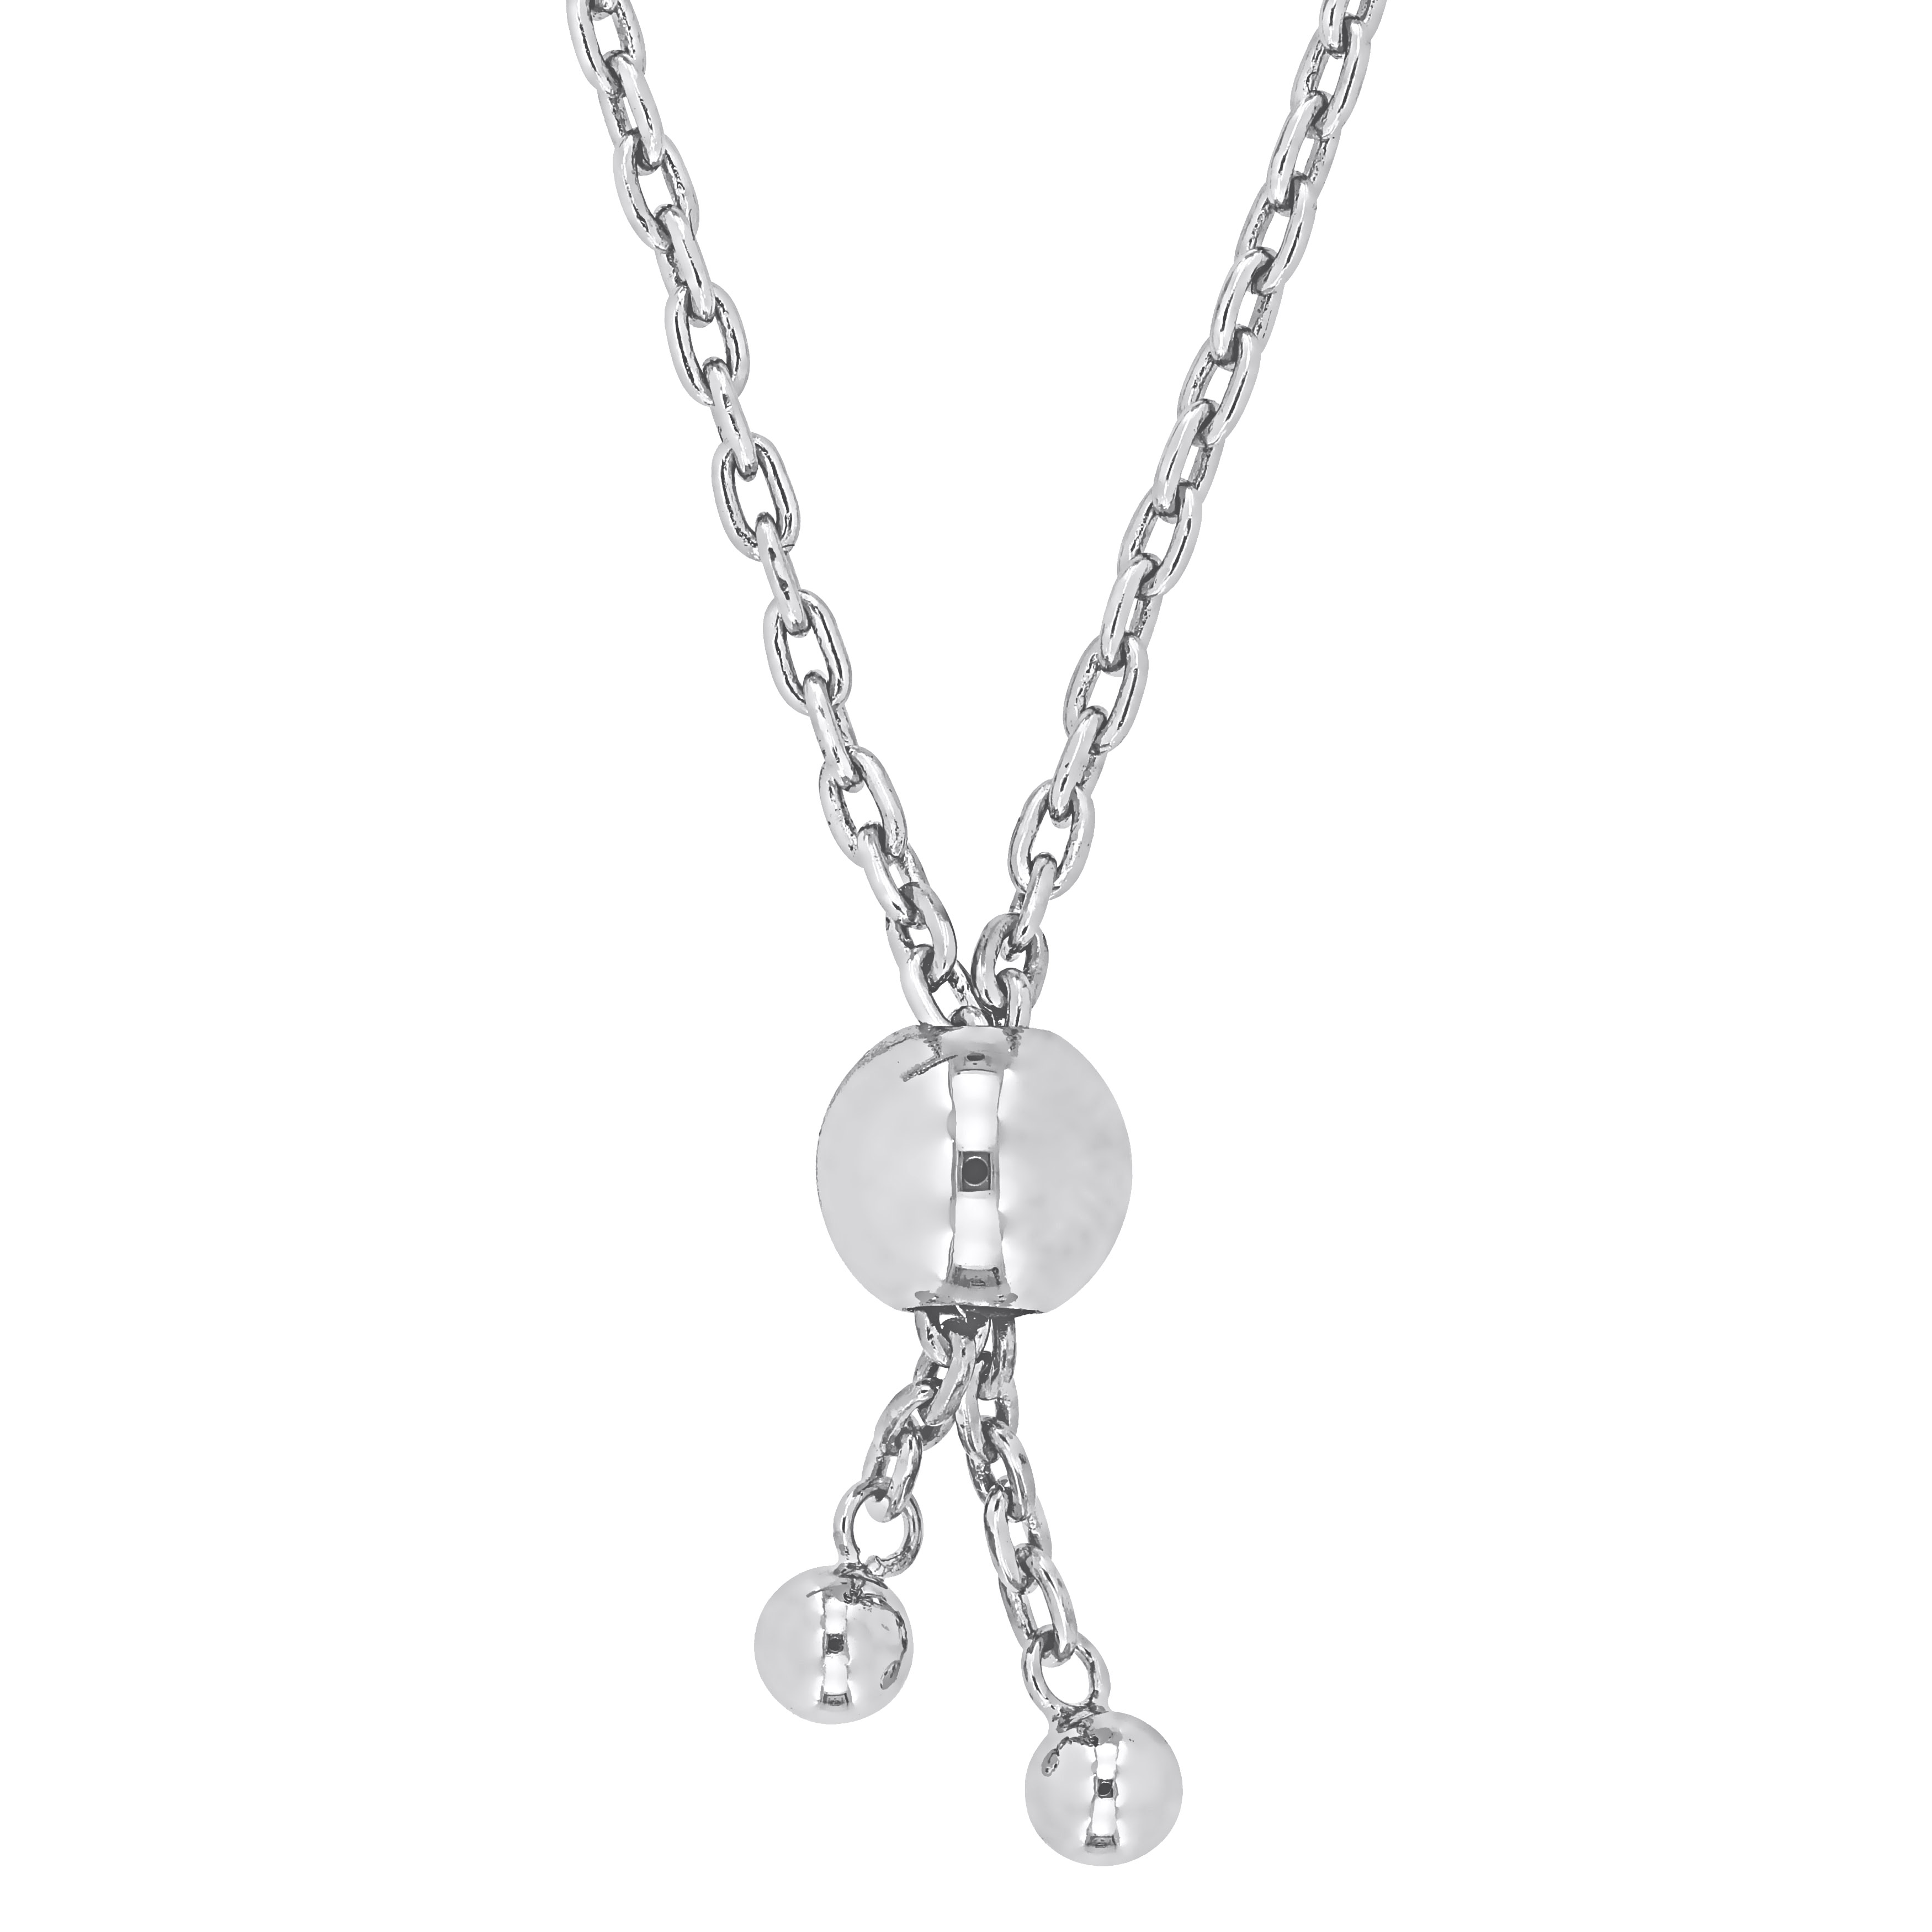 3/4 CT DEW Created Moissanite Oval Halo Adjustable Bolo Bracelet in Sterling Silver - 5-10 in.